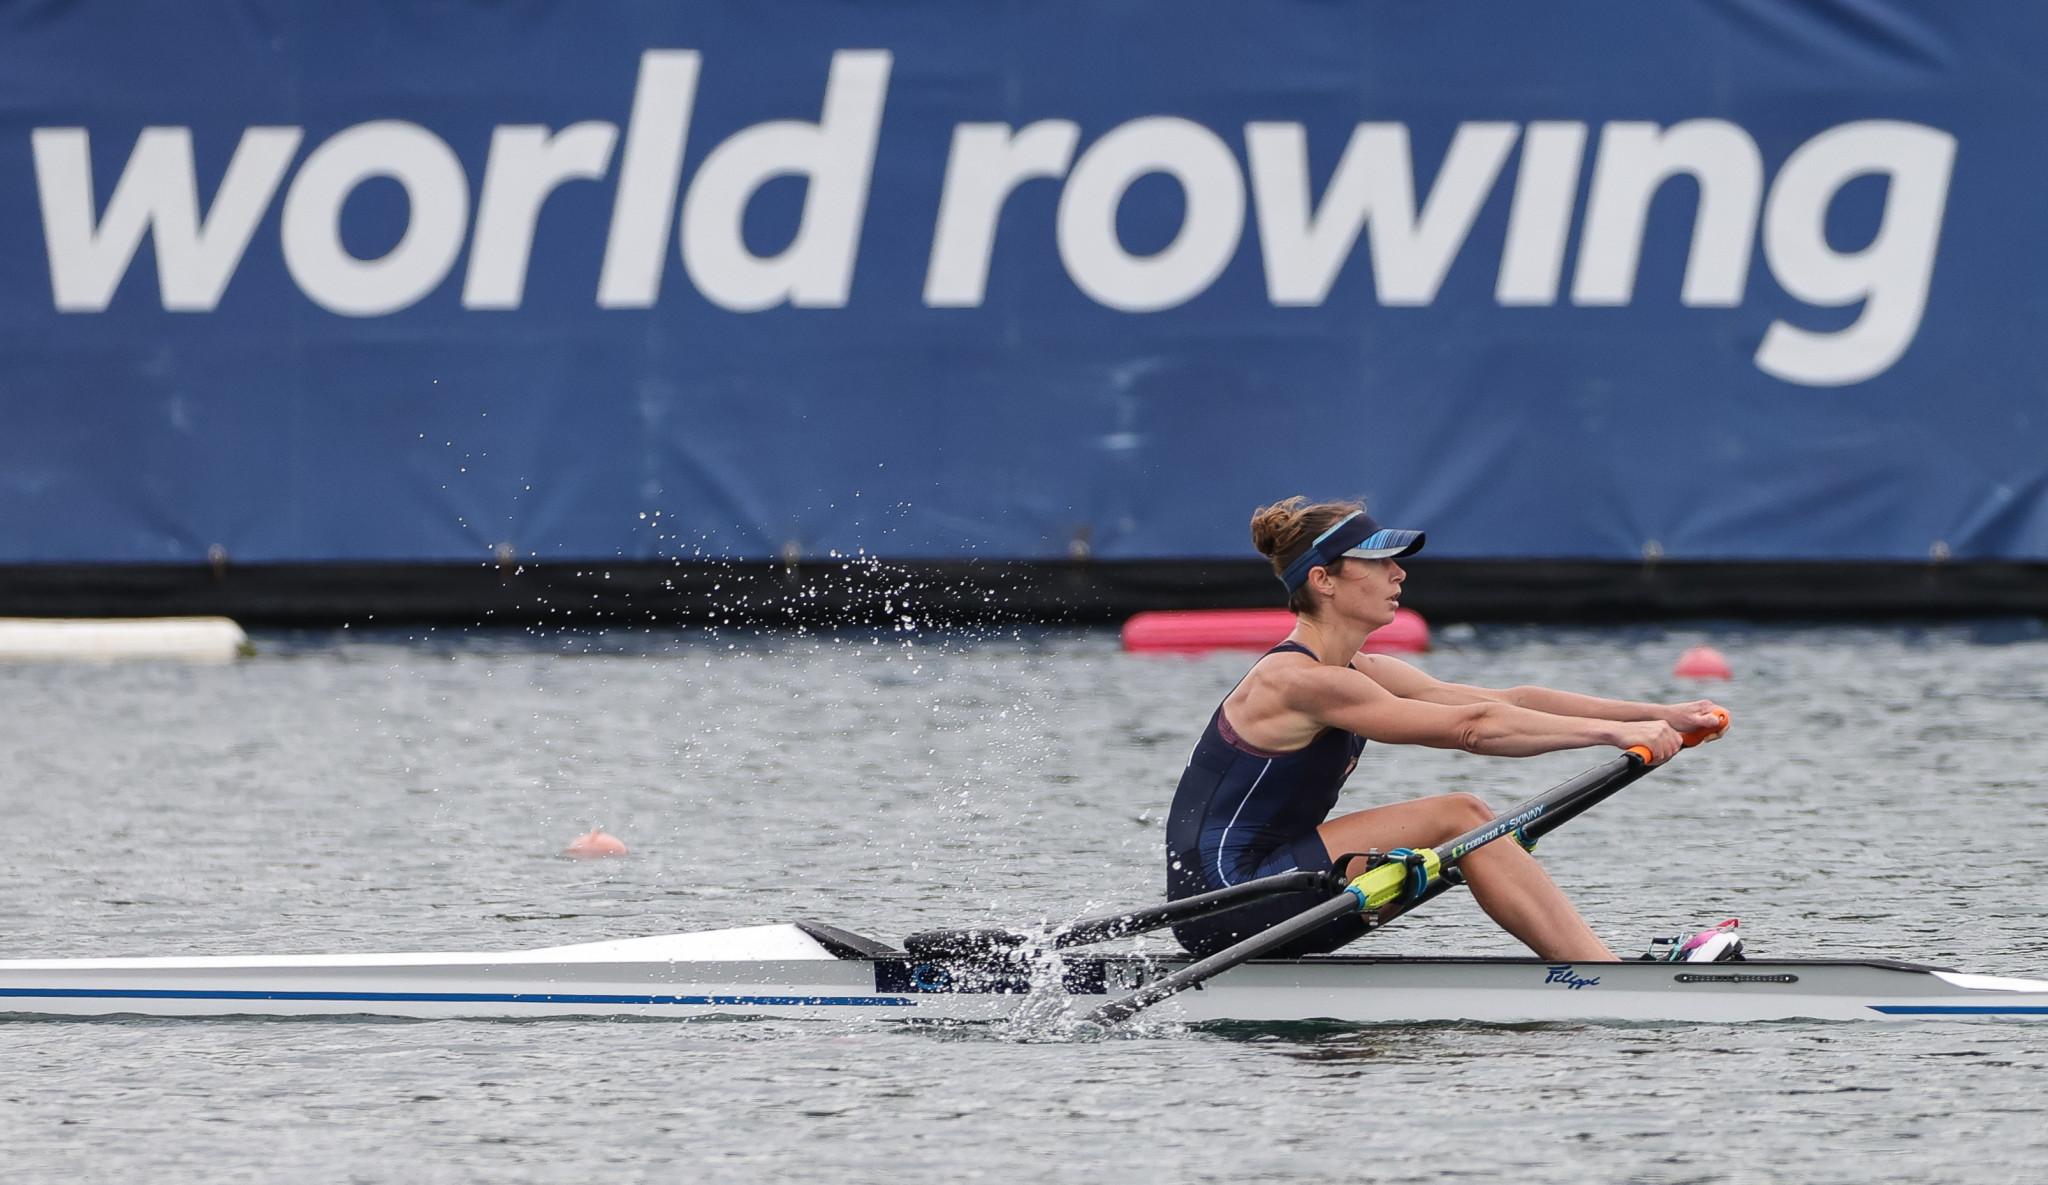 Mary Jones was one of three title winners at the World Rowing Cup II ©Getty Images